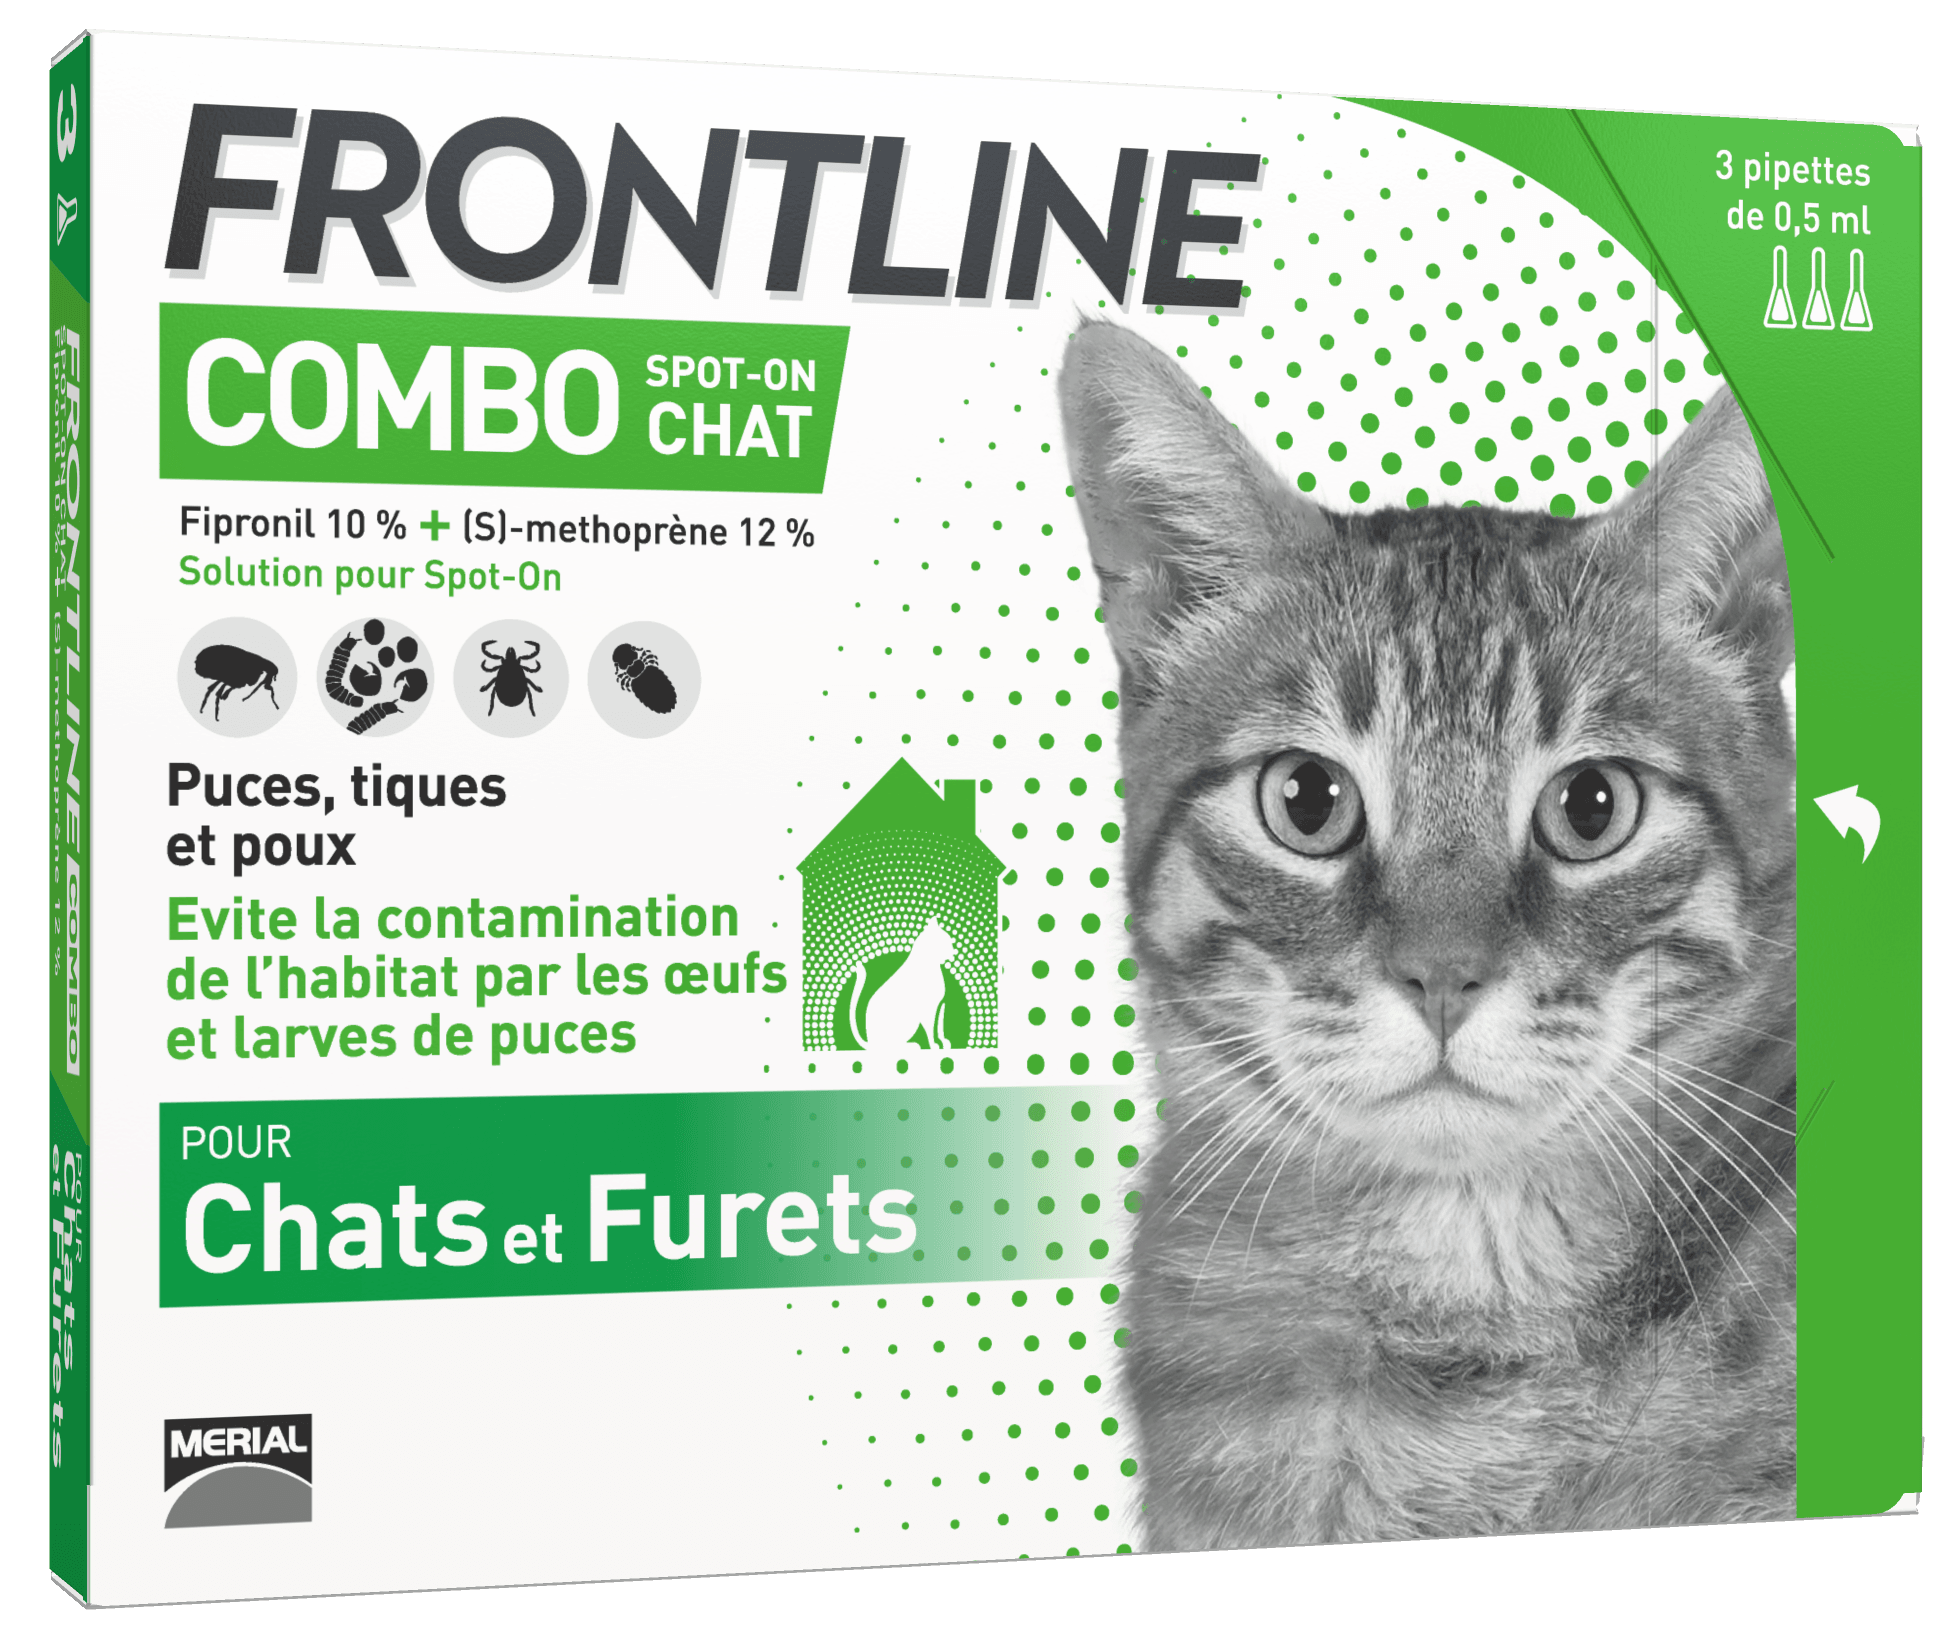 FRONTLINE Combo Chat